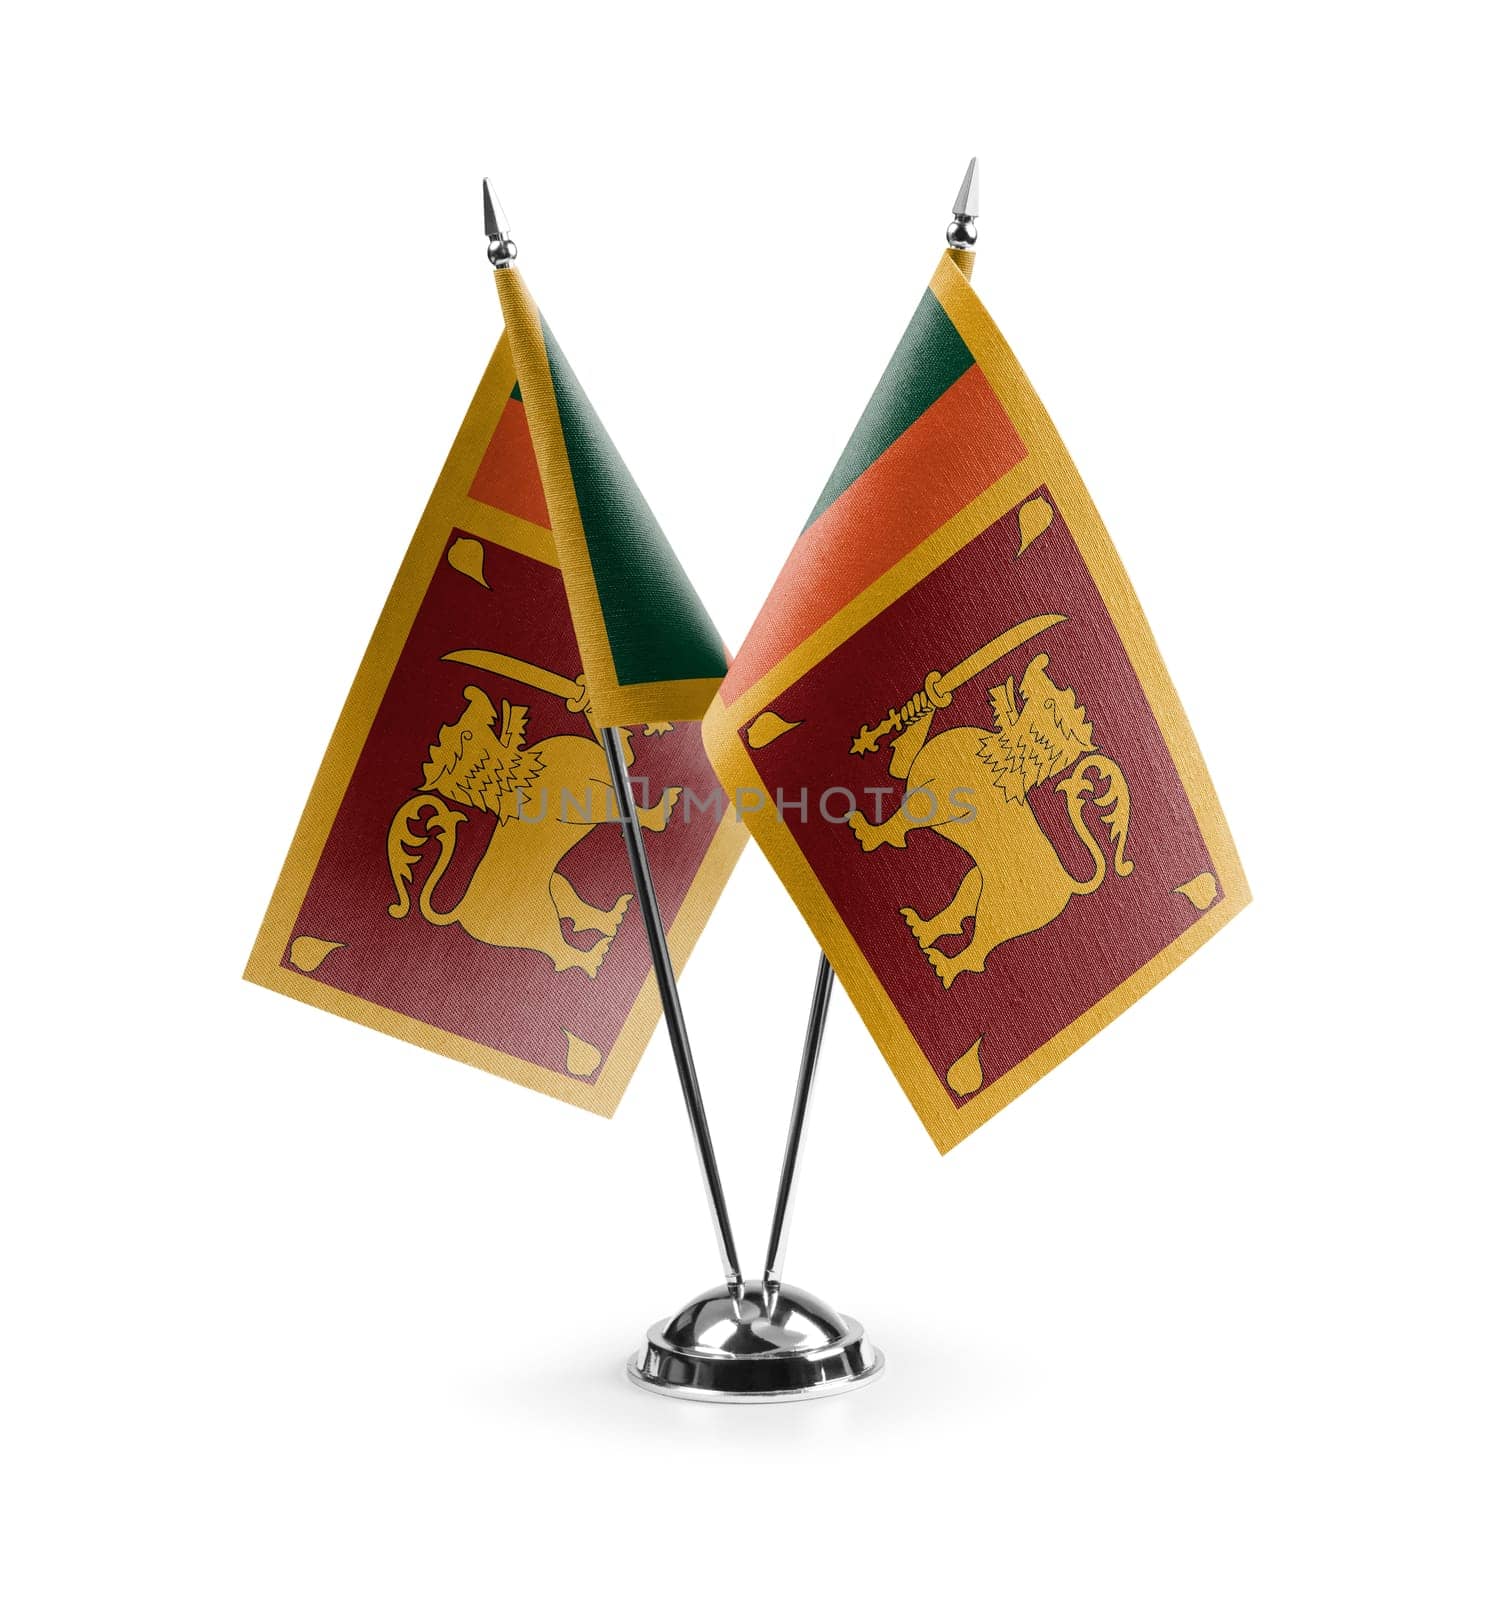 Small national flags of the Sri Lanka on a white background.